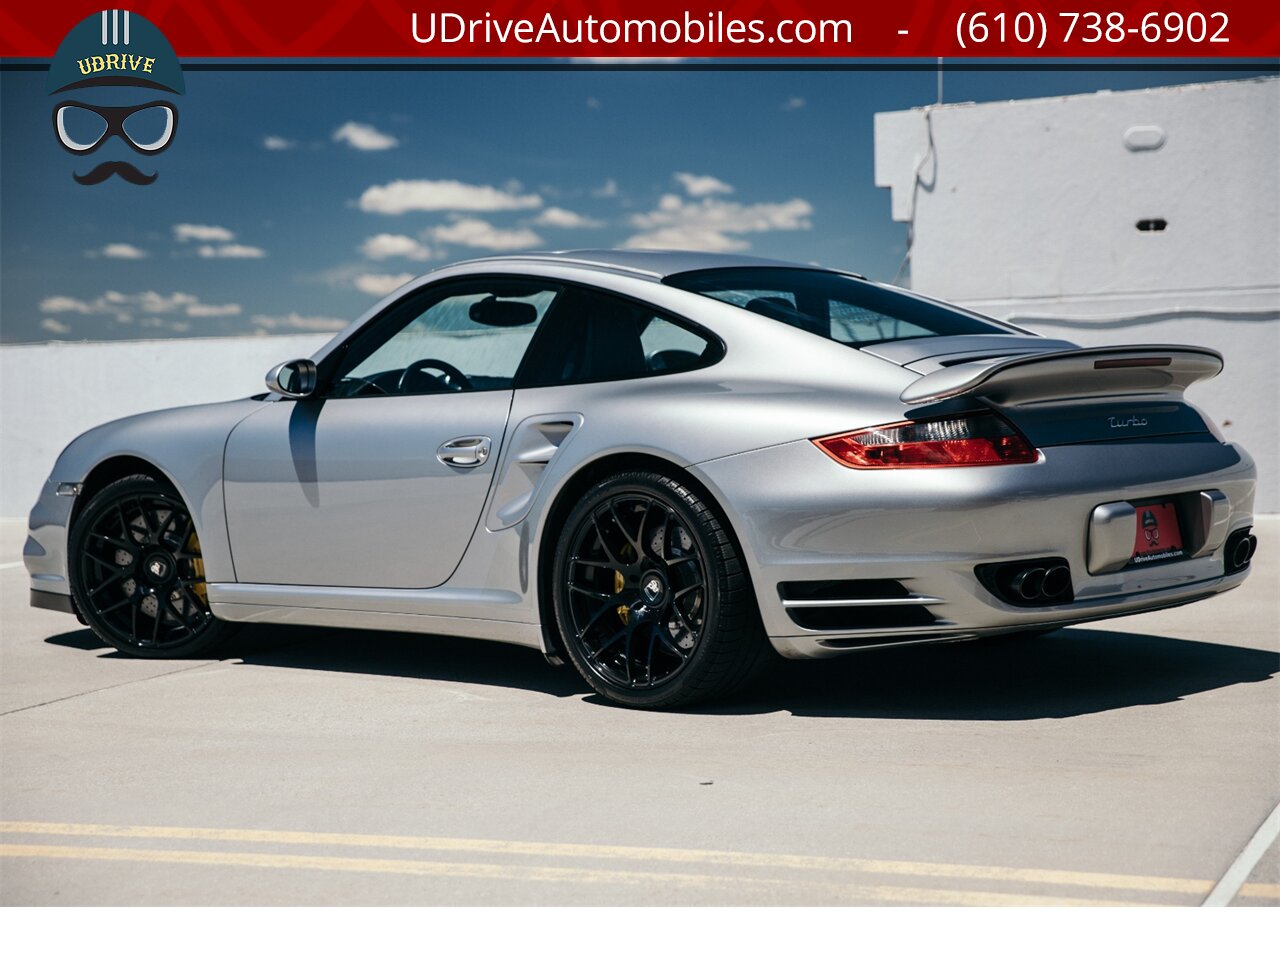 2008 Porsche 911 6 Speed Manual Turbo 997 PCCB's $149k MSRP   - Photo 5 - West Chester, PA 19382